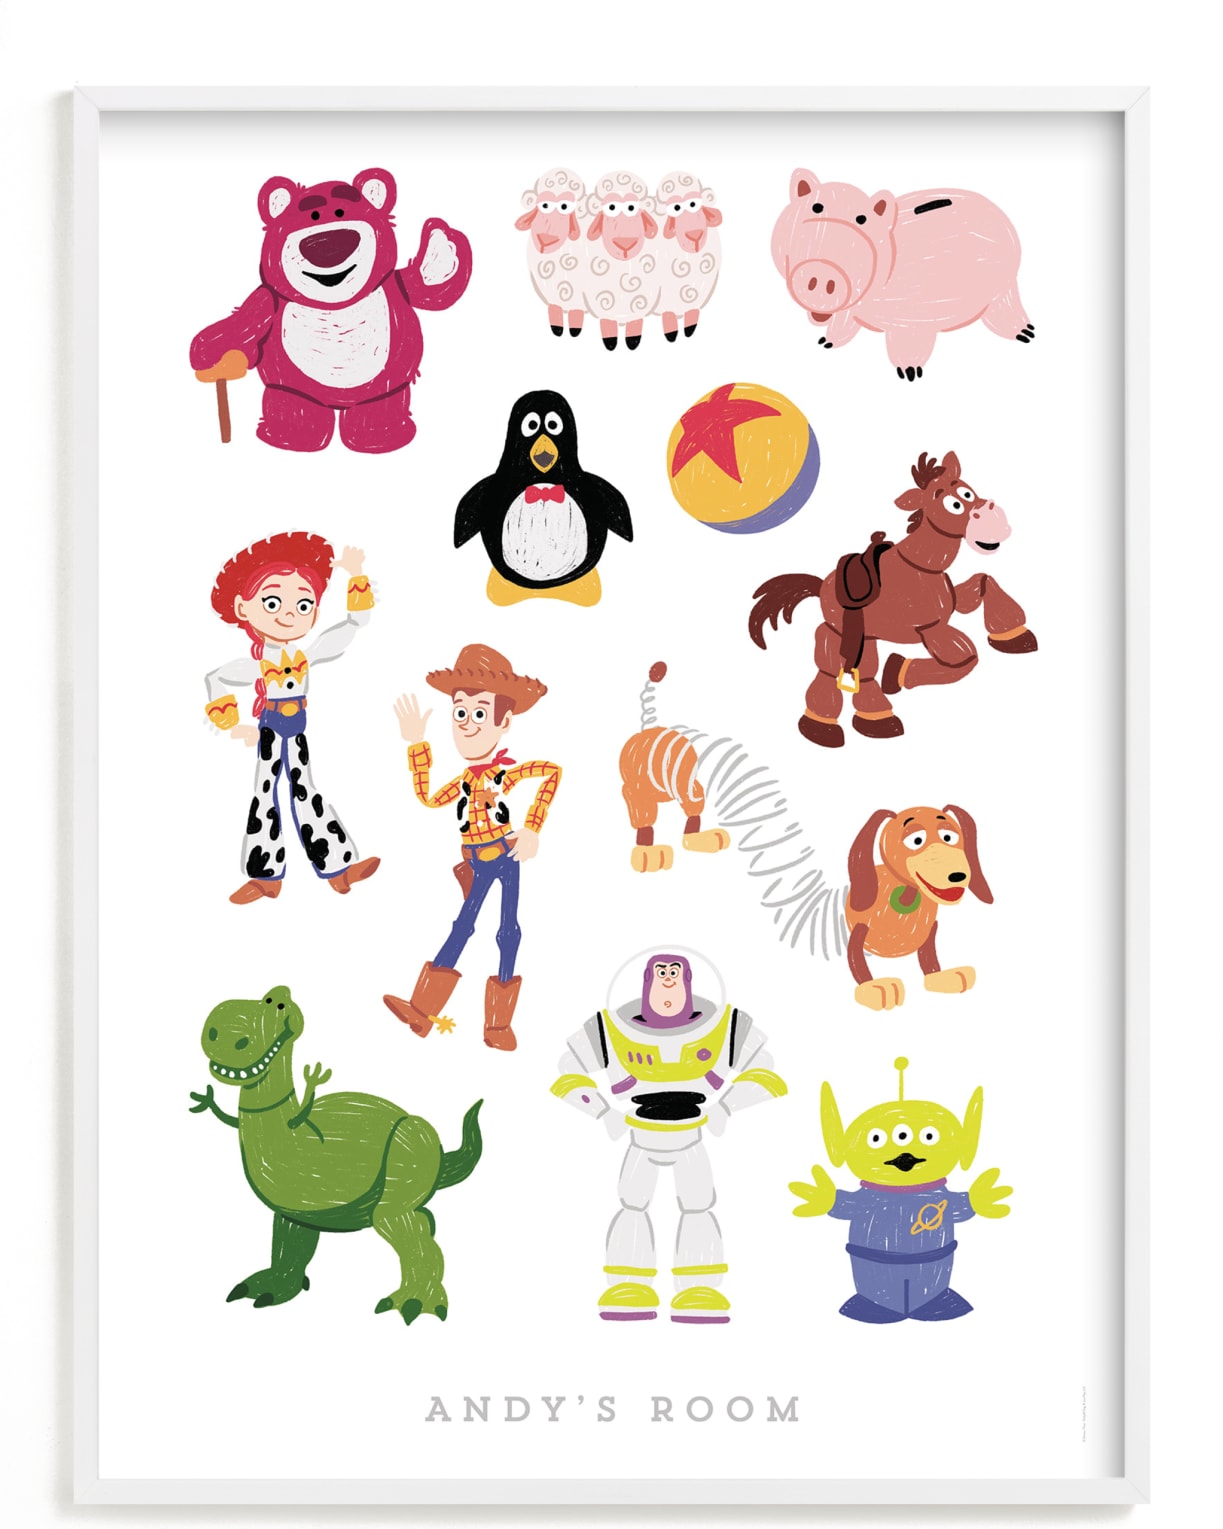 This is a colorful disney art by Rebecca Smith called Andy's Toys from Disney and Pixar's Toy Story.